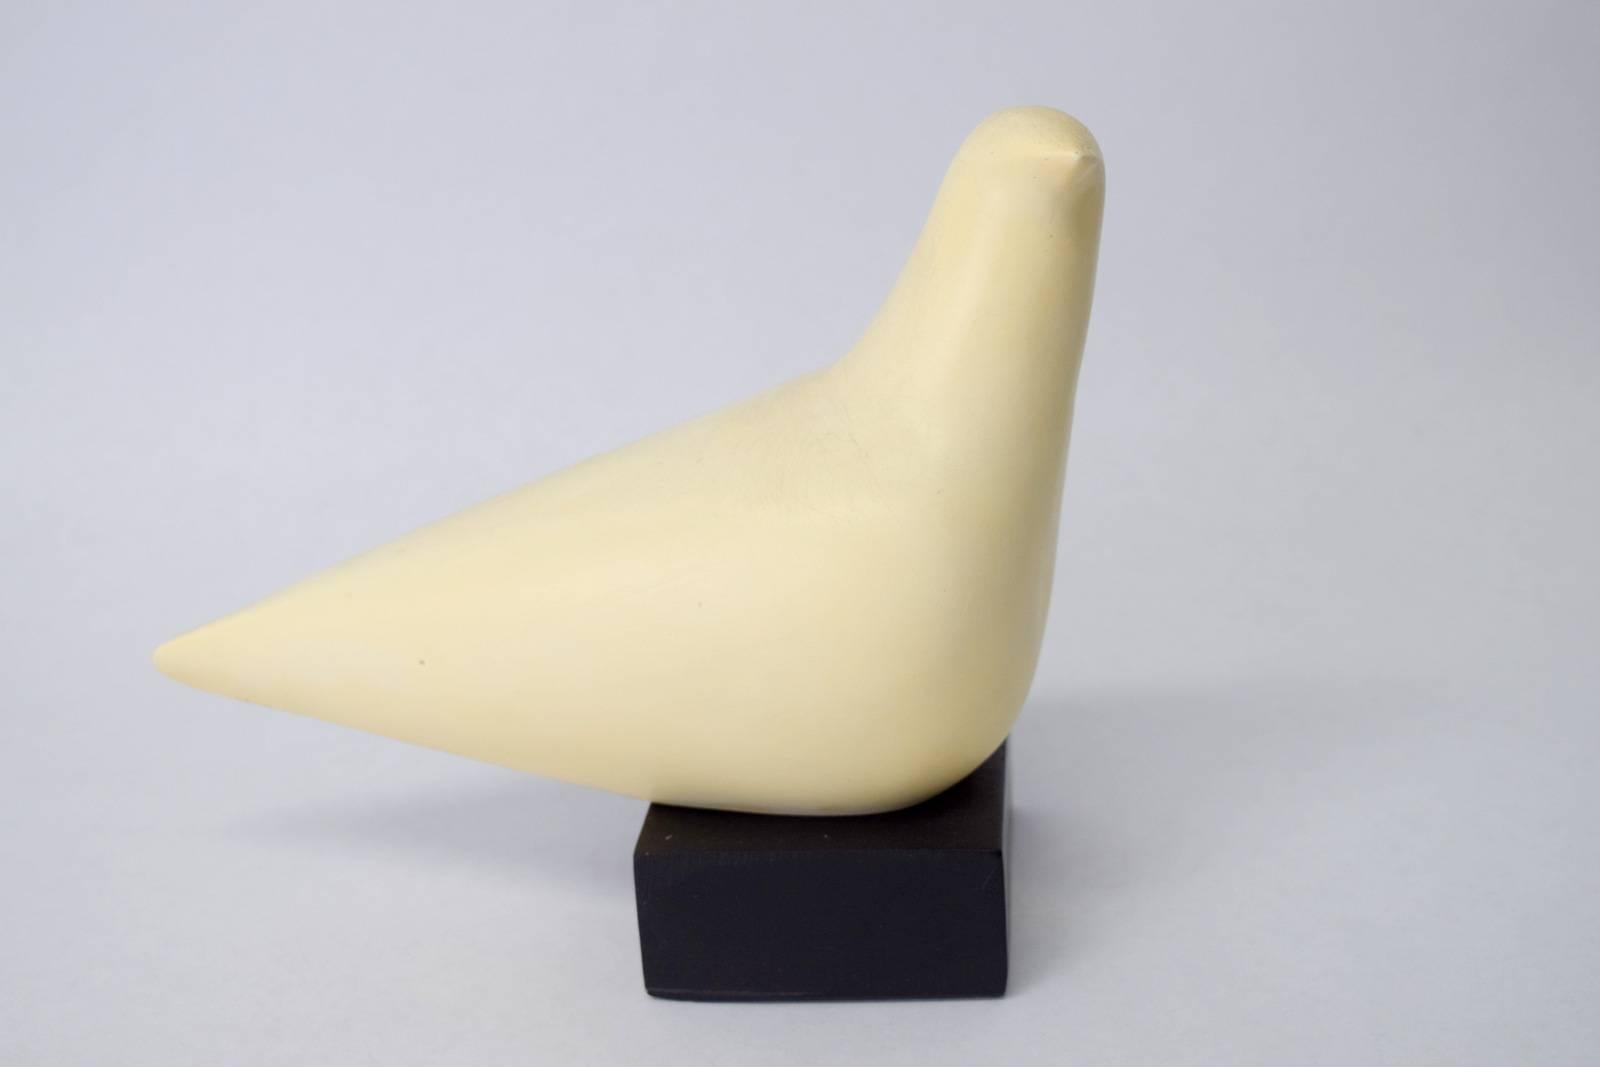 Modernist abstract dove sculpture by Cleo Hartwig. Wonderfully formed sign of peace constructed of white foundry stone. 